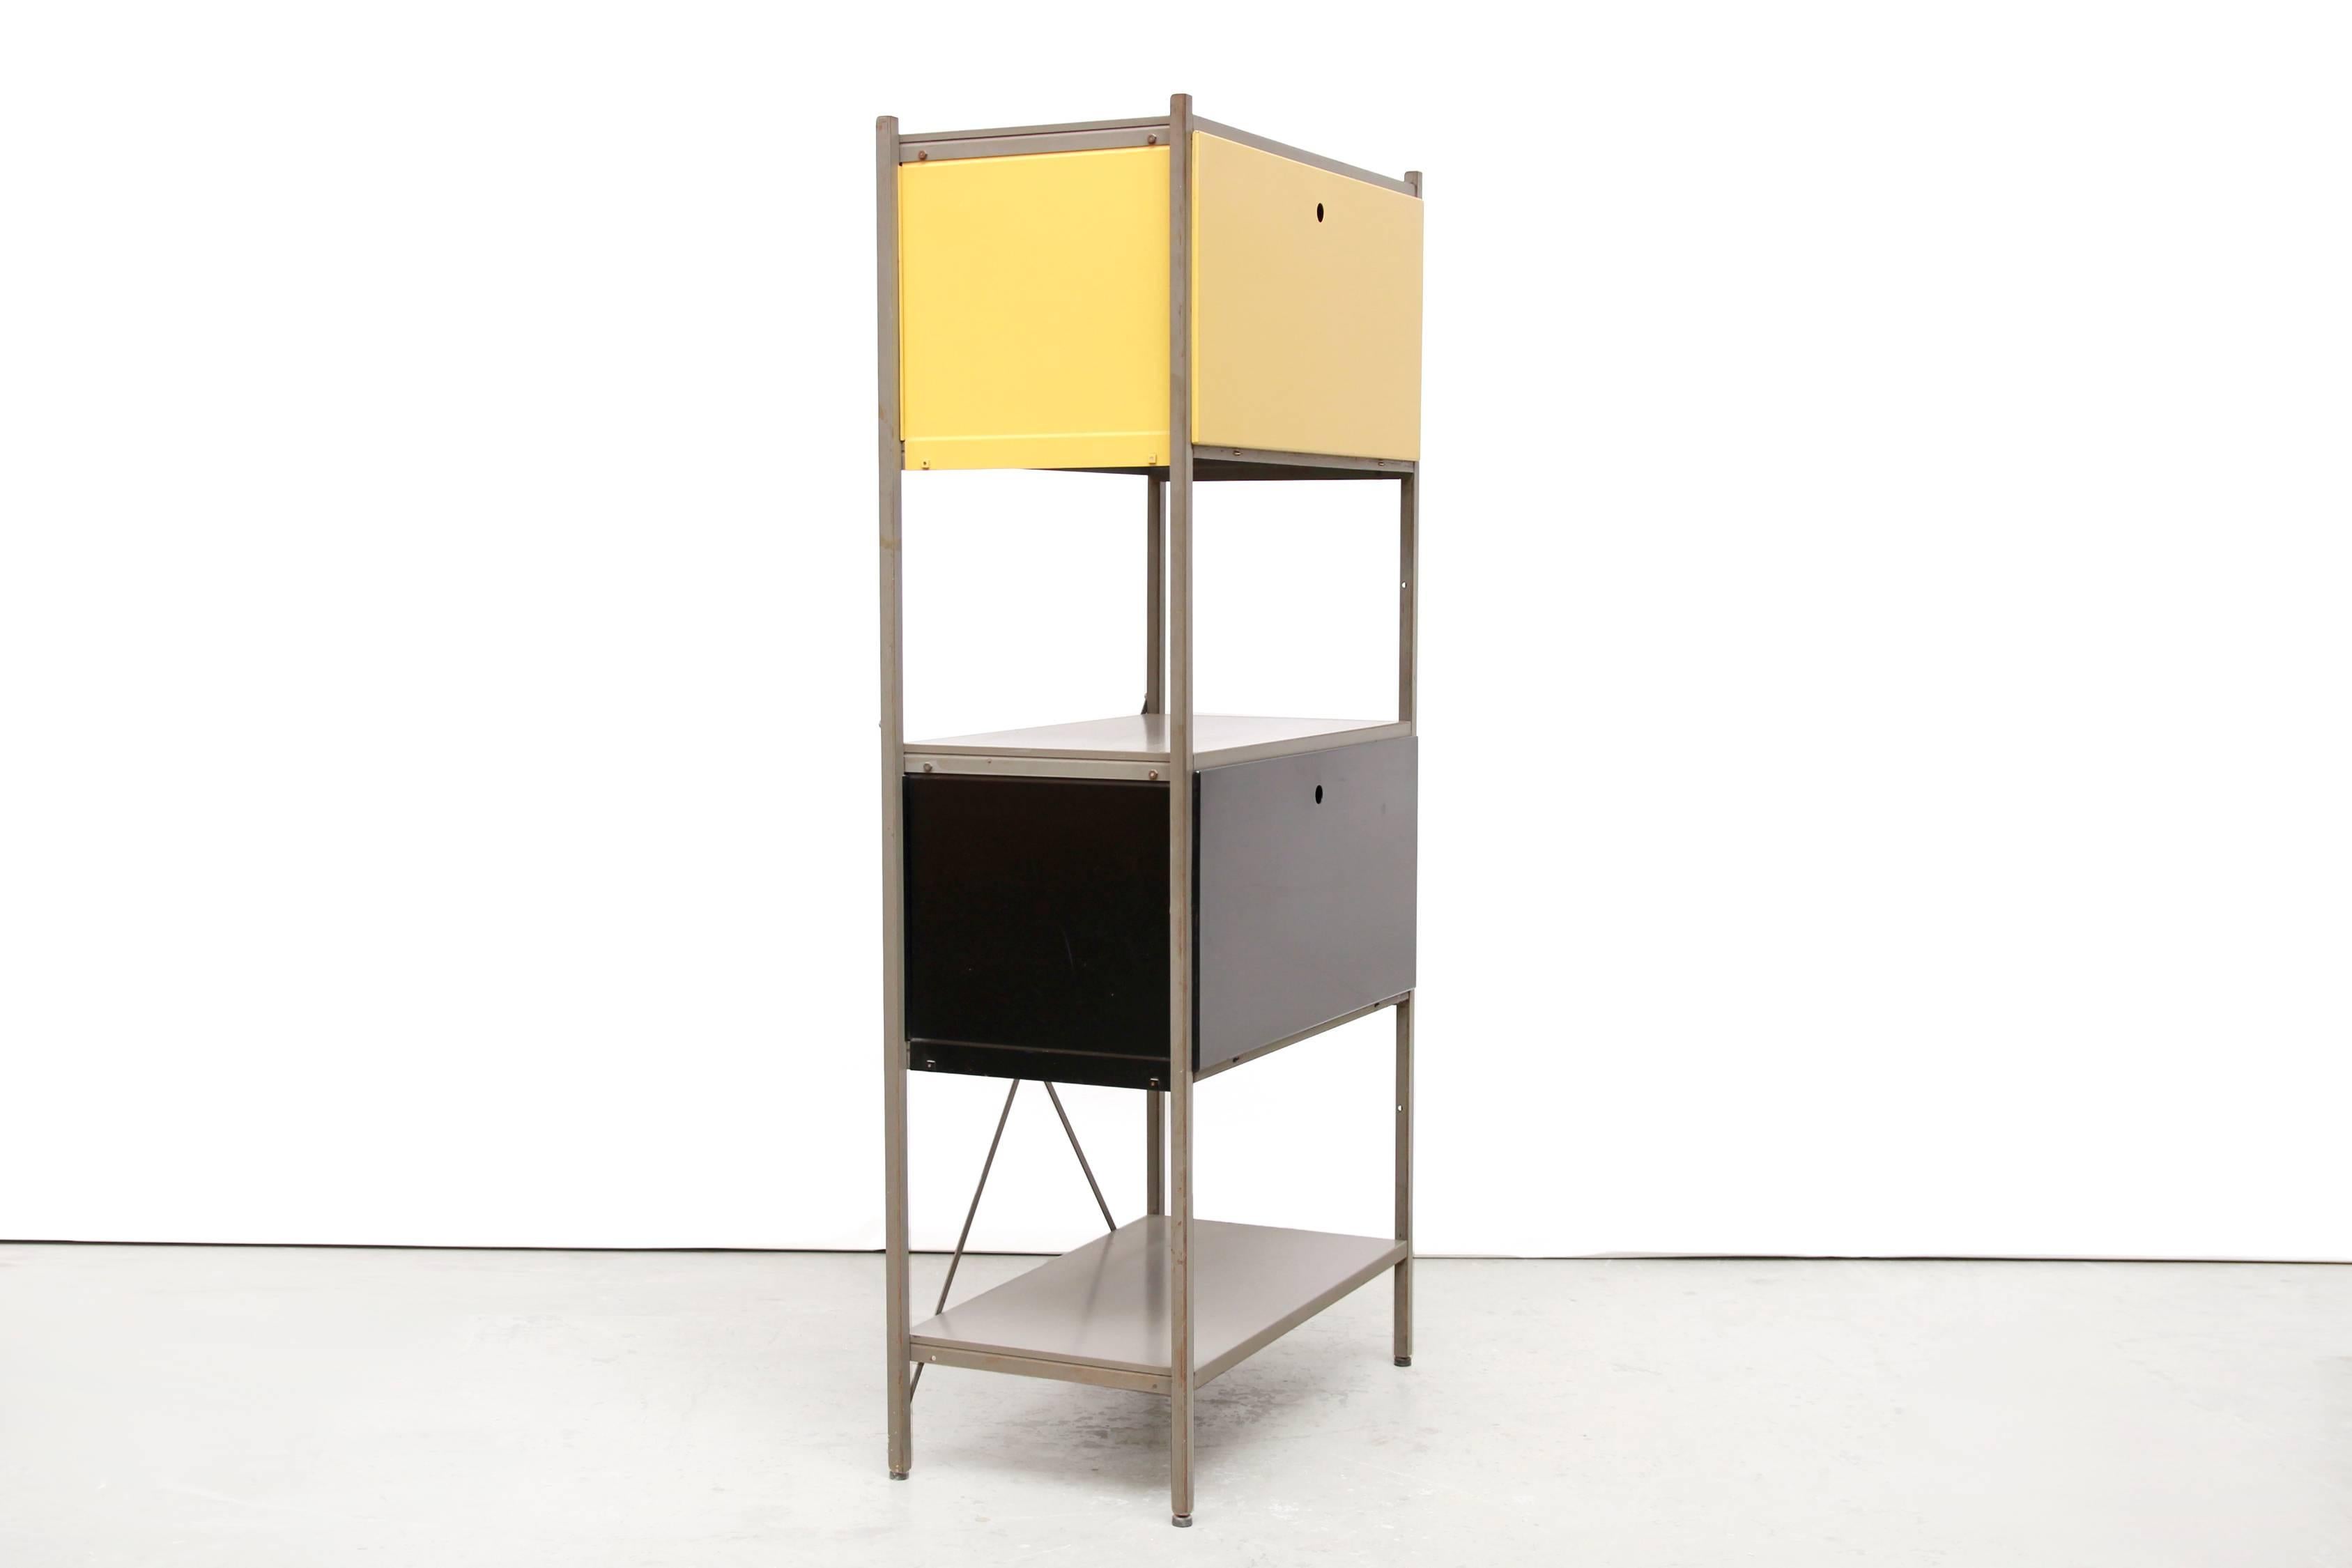 Dutch Industrial Metal Cabinet or Divider Model No. 663 by Wim Rietveld for Gispen